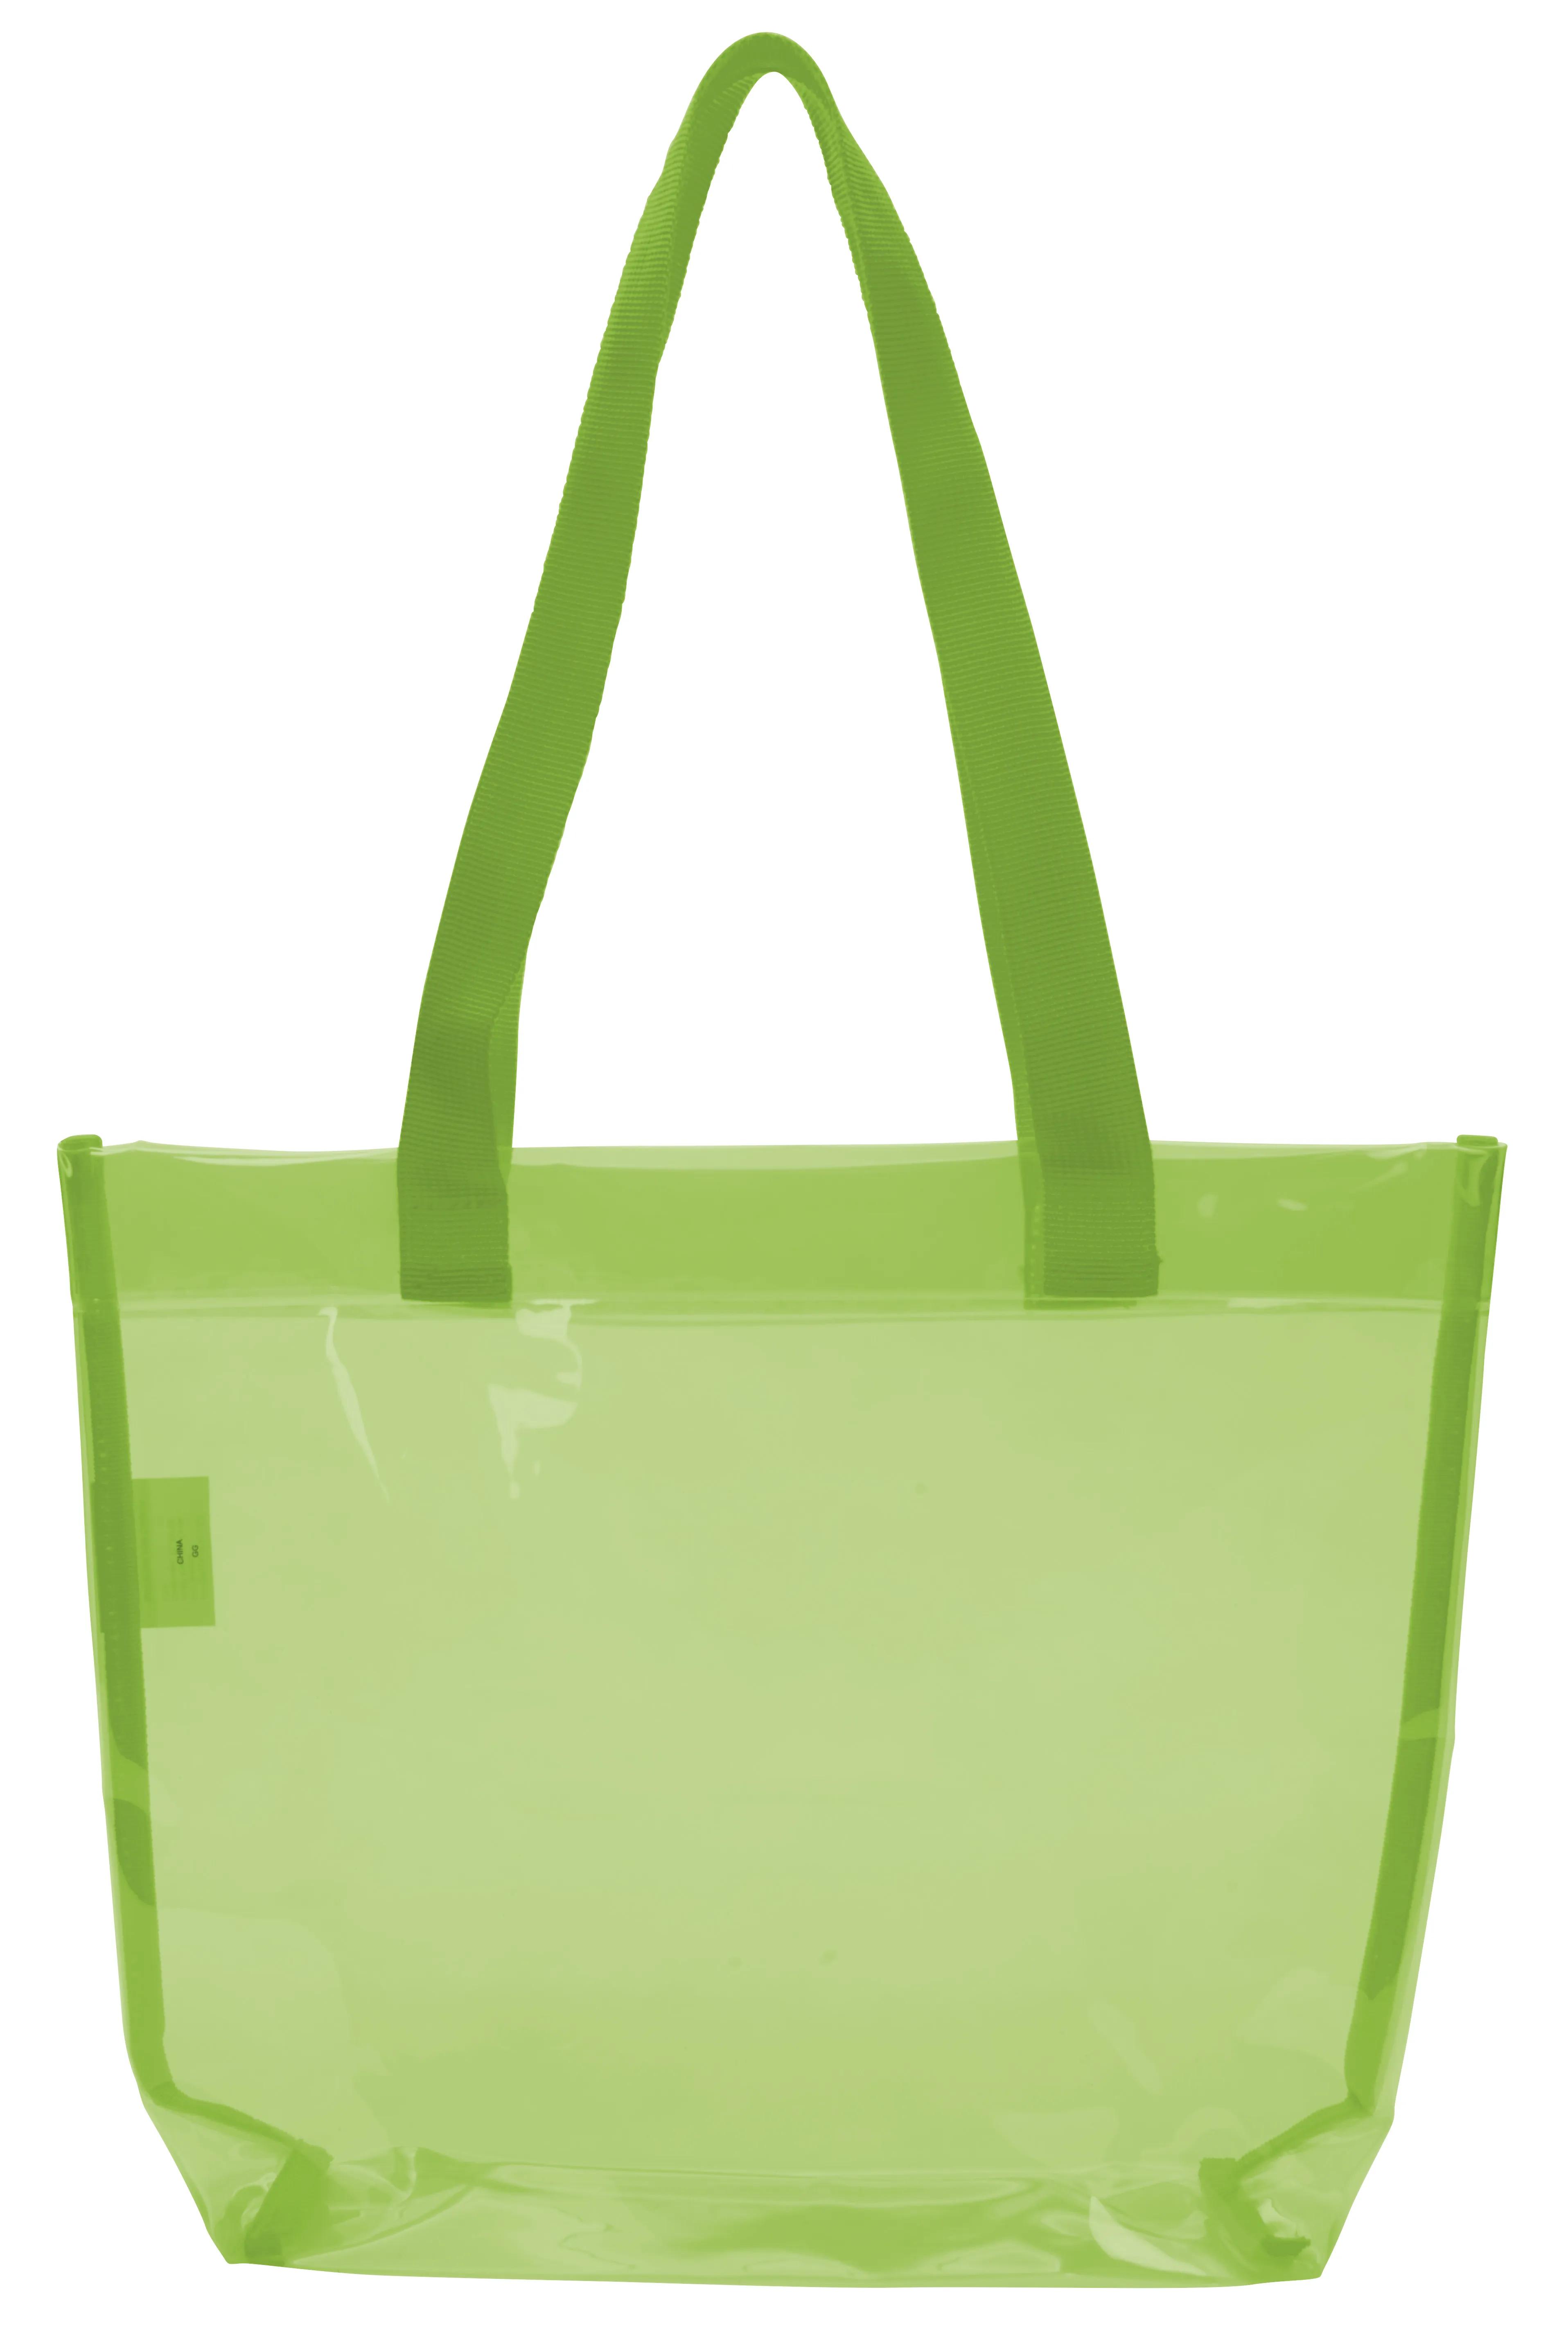 Translucent Color Tote 13 of 13